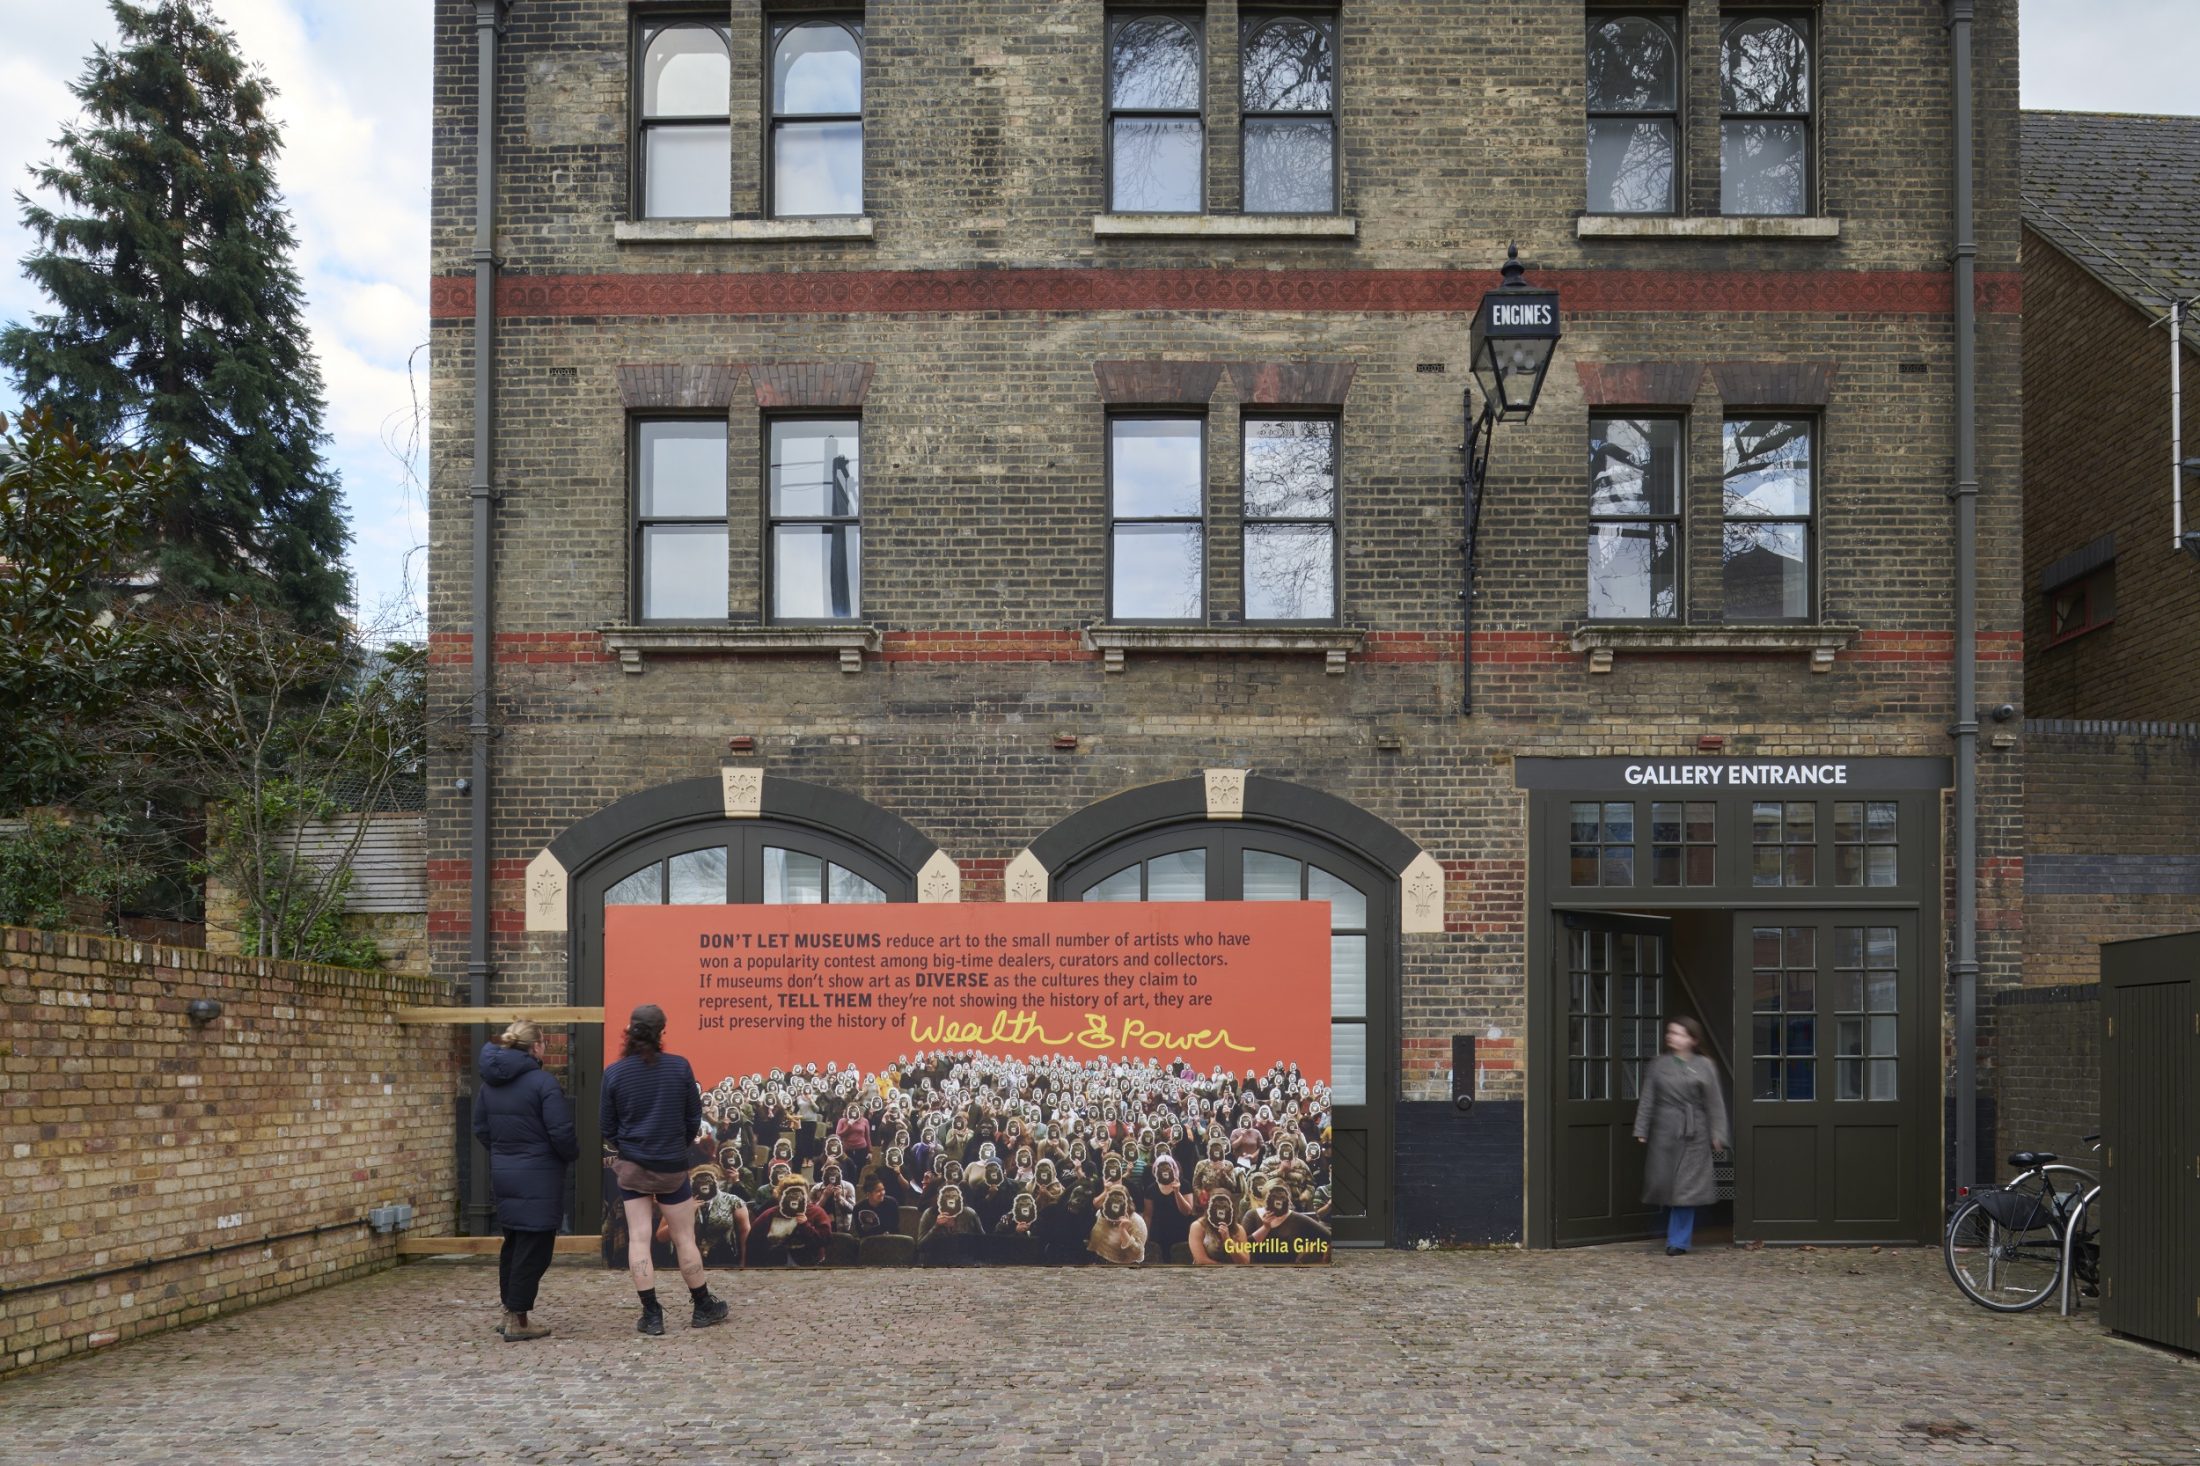 A billboard out of an old Fire Station building in Peckham. People stand on the street and look at it. The billboard displays an artwork by artist collective Guerilla Girls.